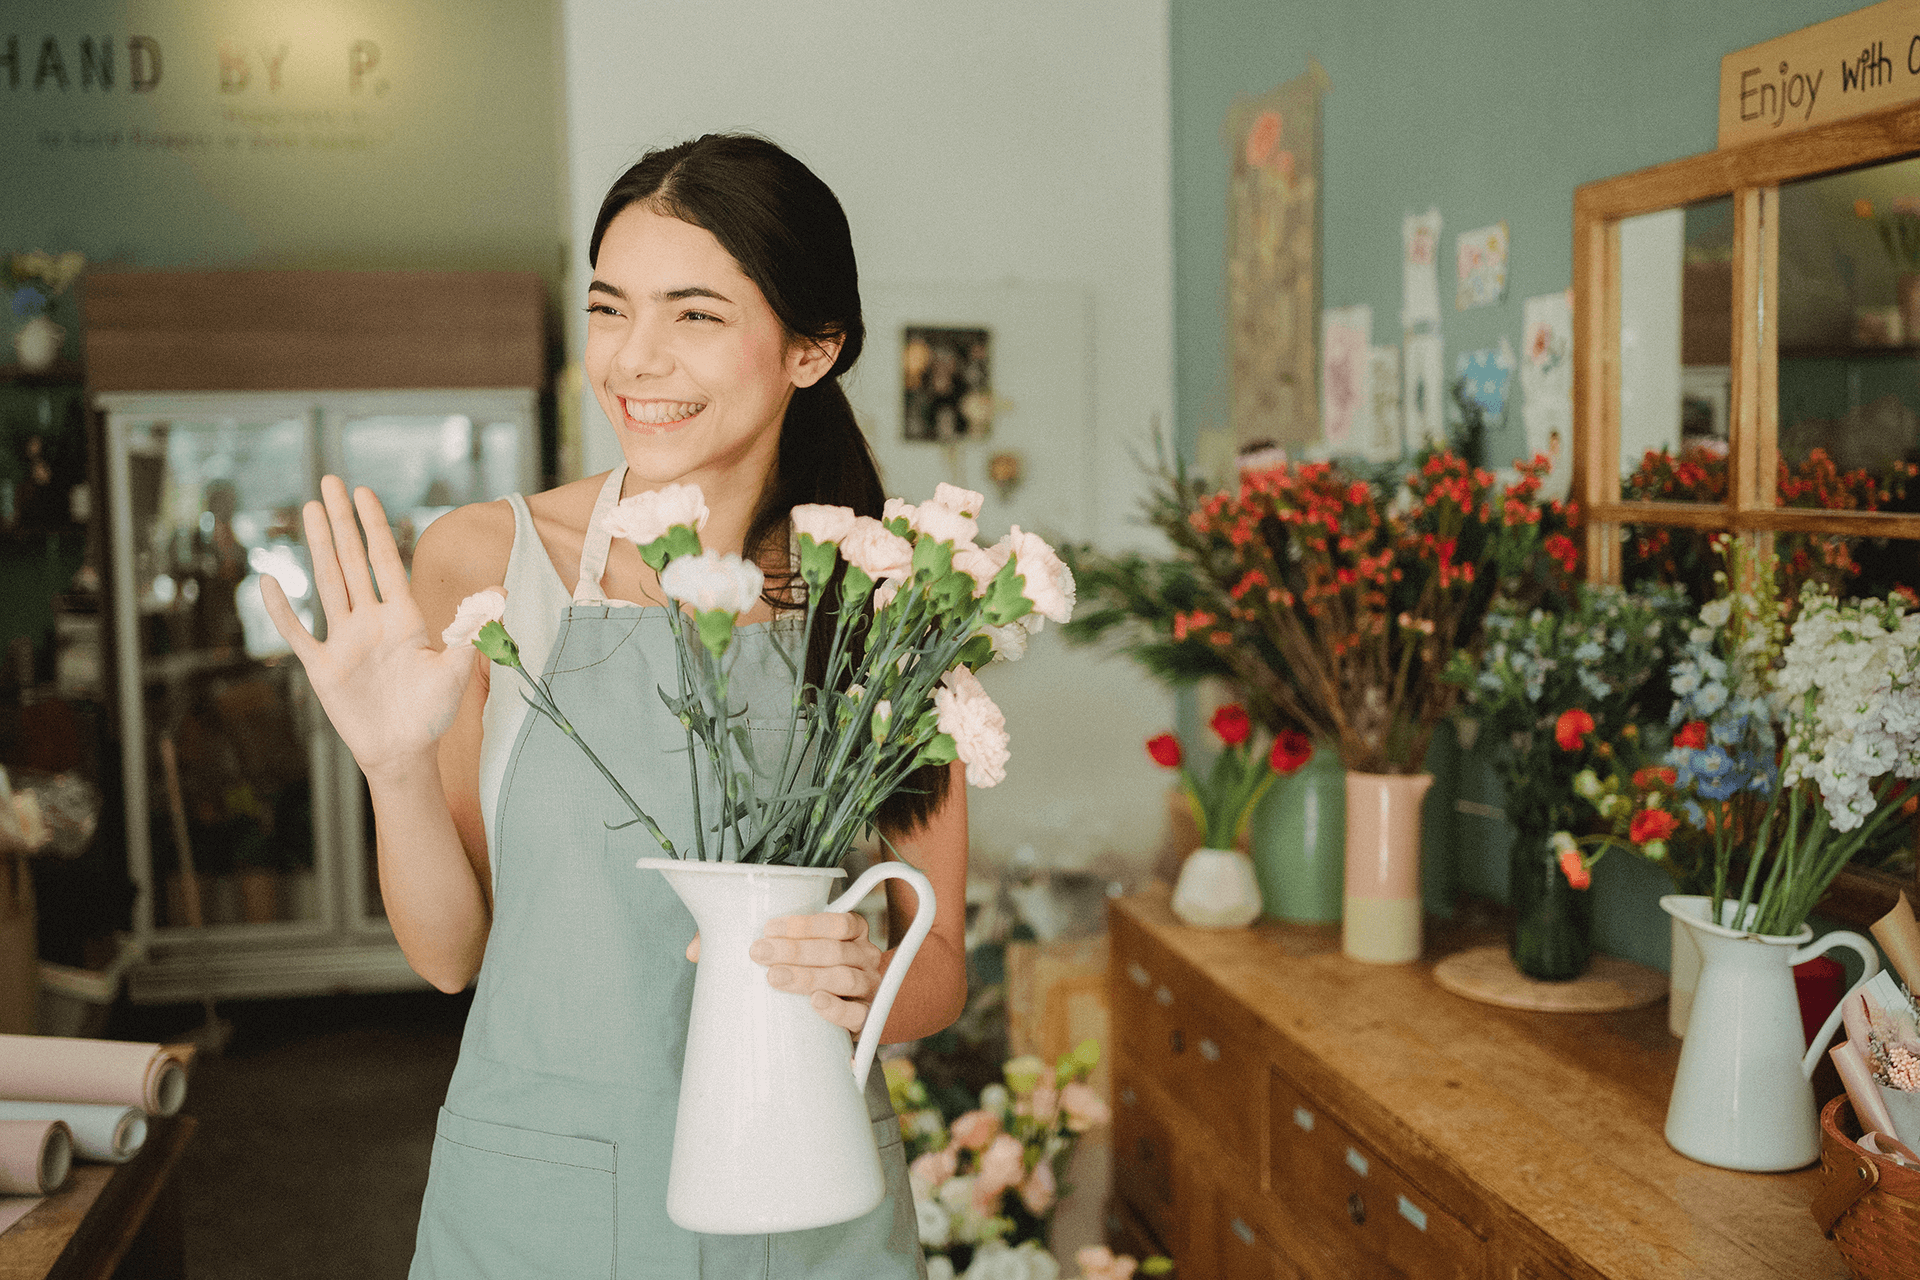 Smiling Florist Holding a Vase and Waving at a Customer